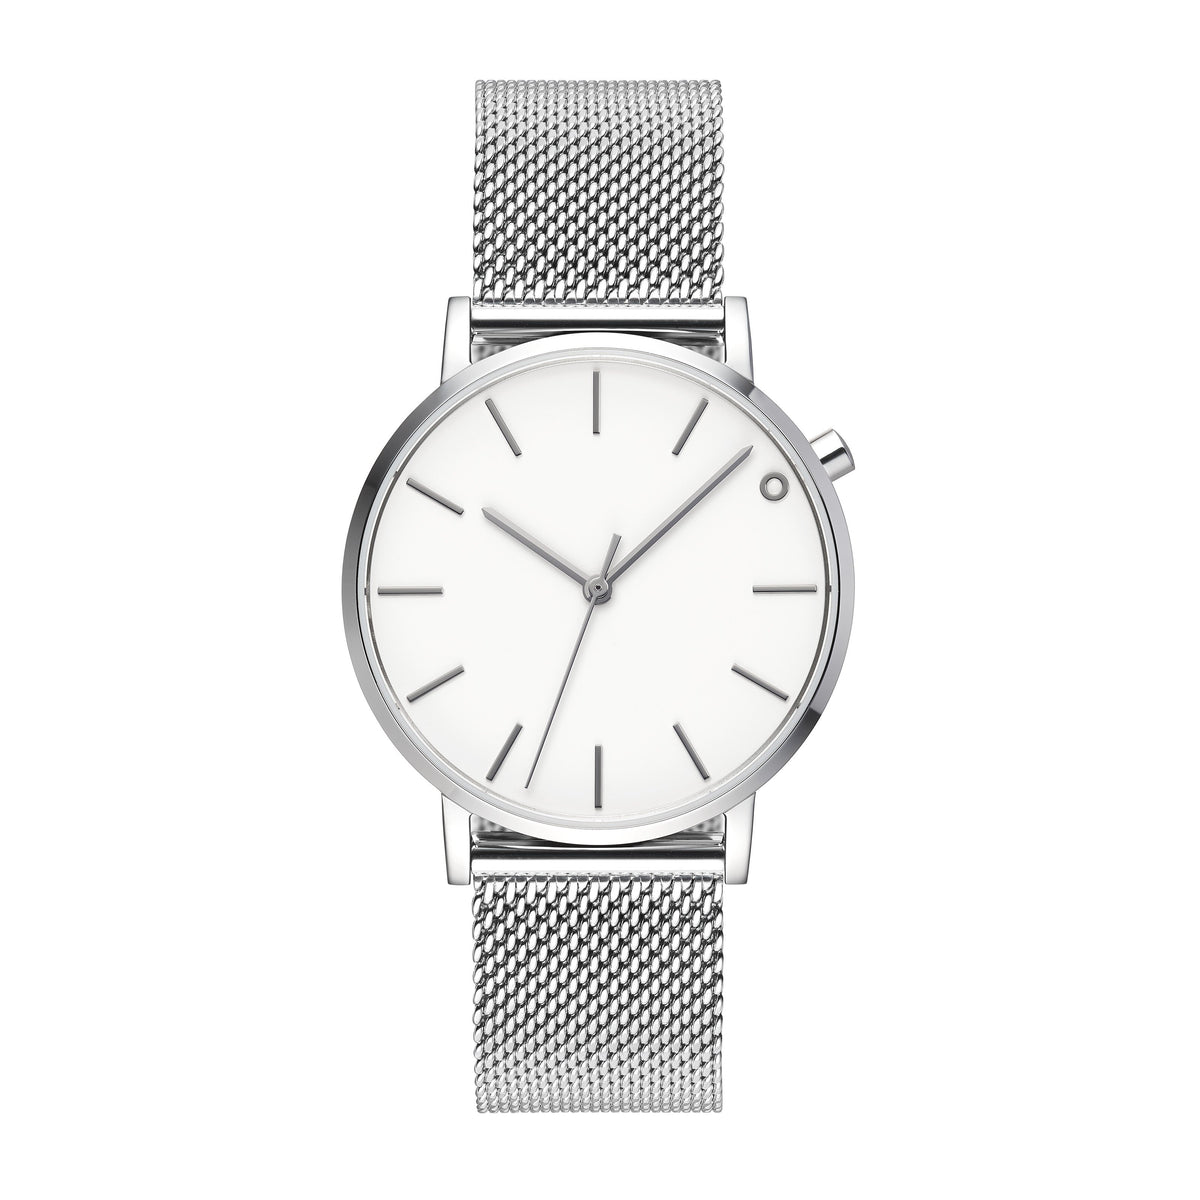 The White and Silver Watch - Mesh